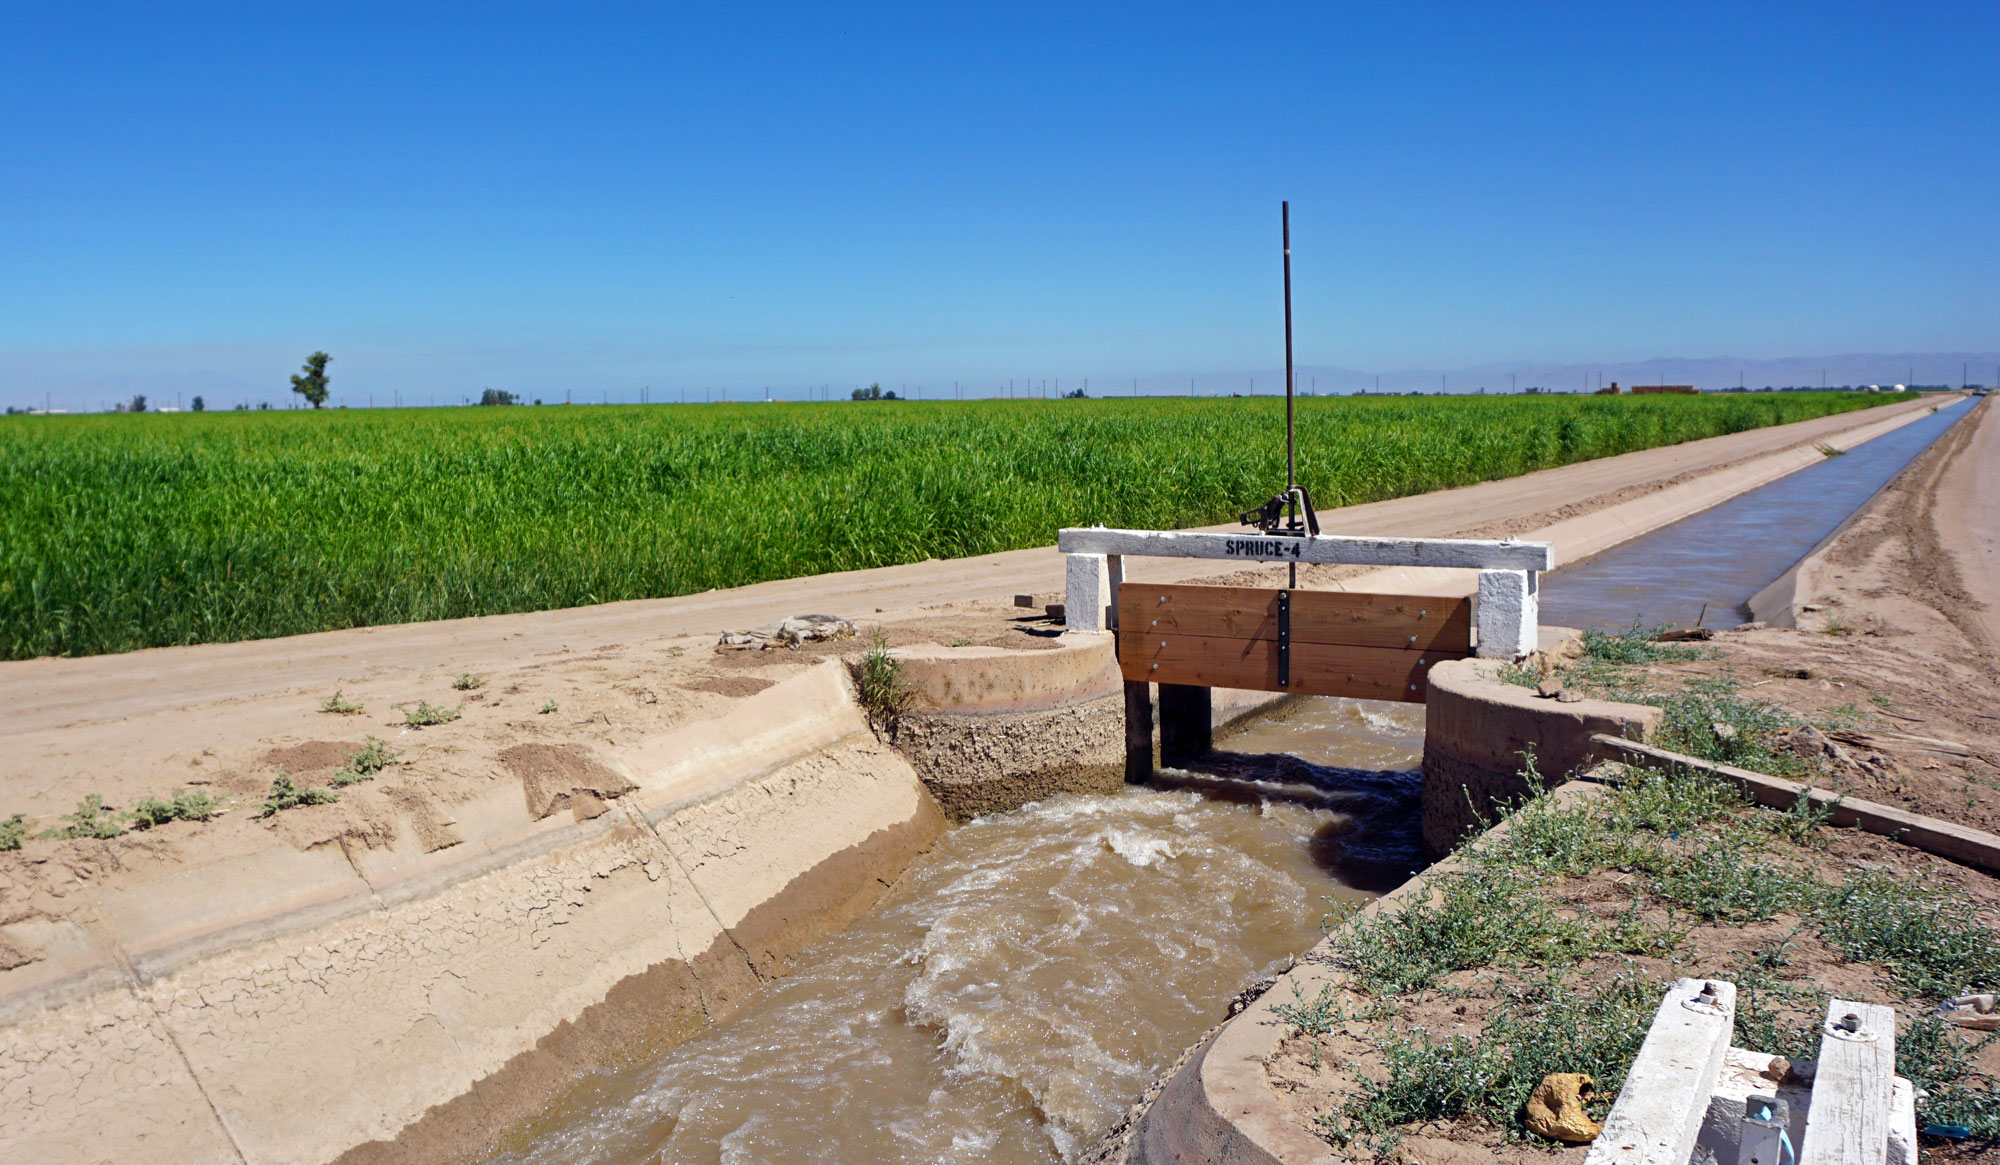 The Imperial Valley produces around two-thirds of the country’s vegetables in the winter, solely with Colorado River water.